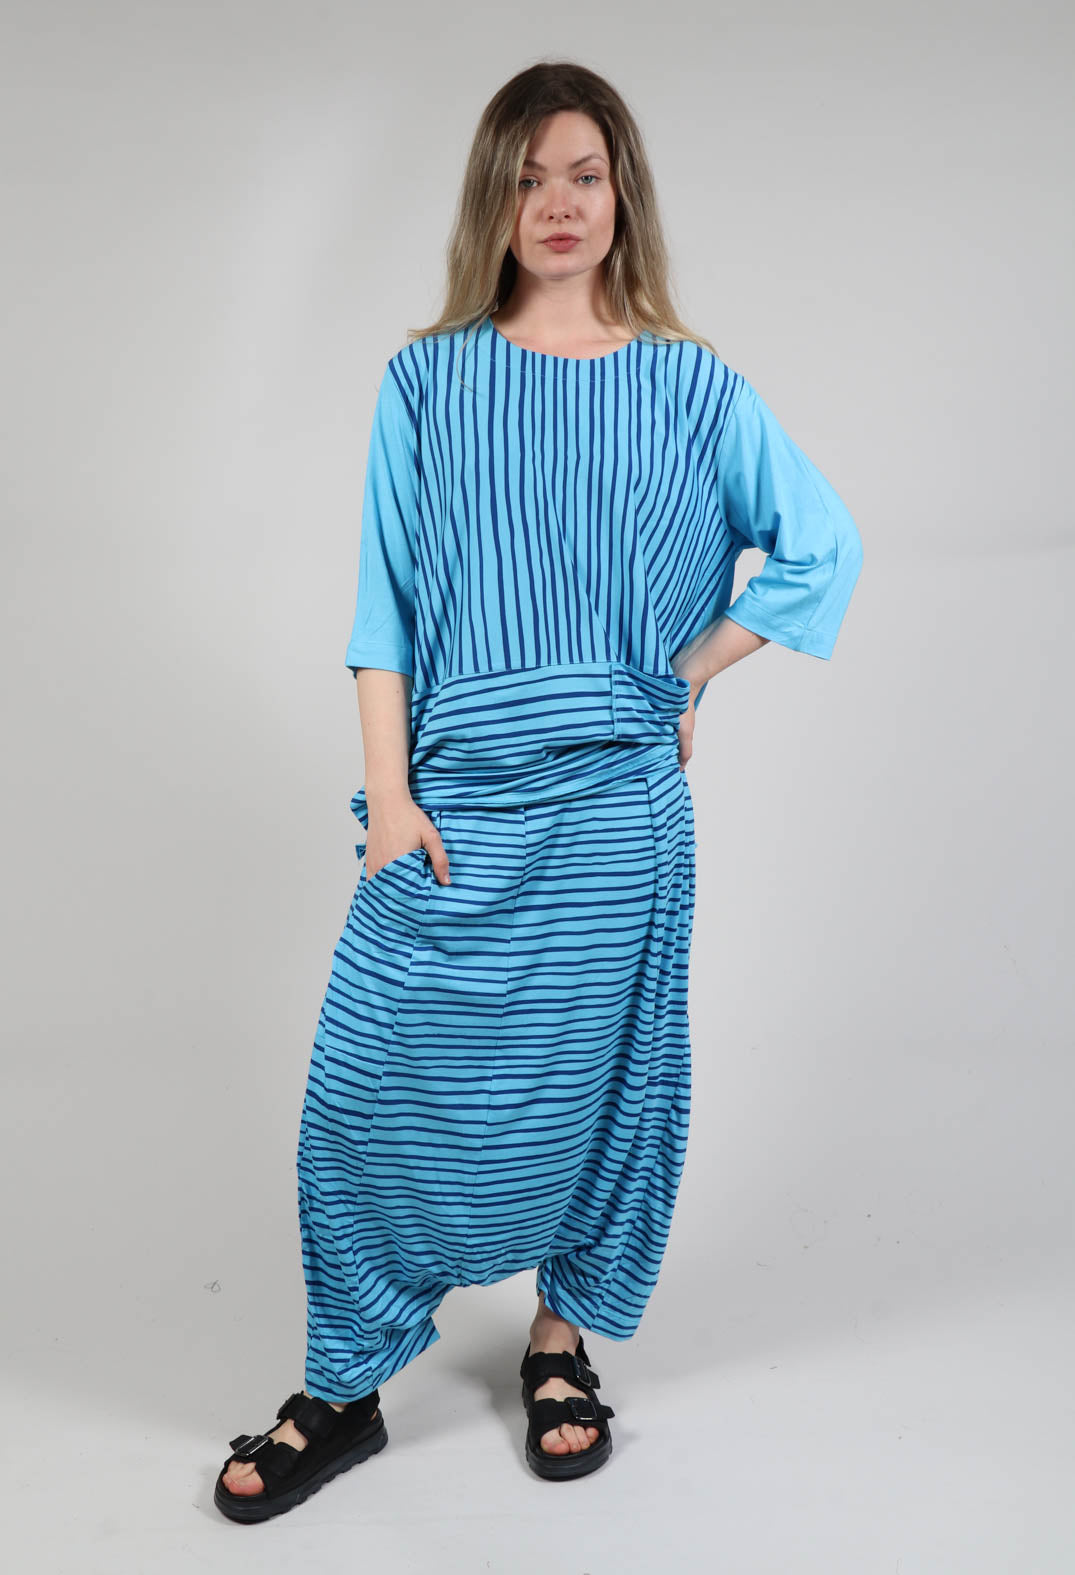 Jersey Drop-Crotch Trousers in Turquoise with Blue Lines